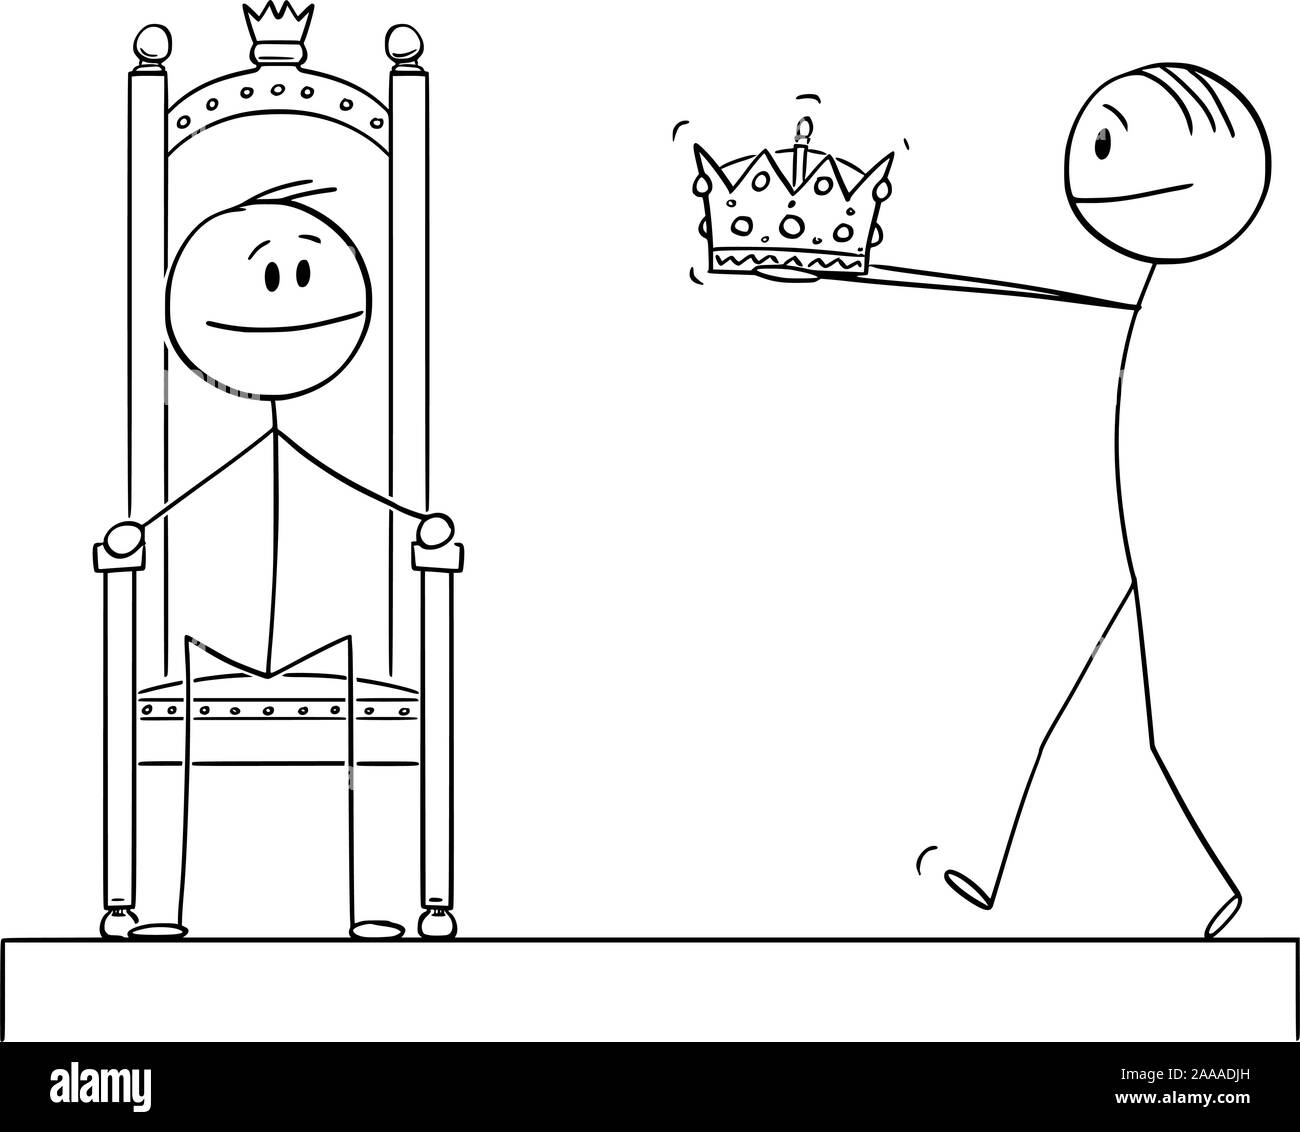 New Uses for the Iron Throne | The New Yorker